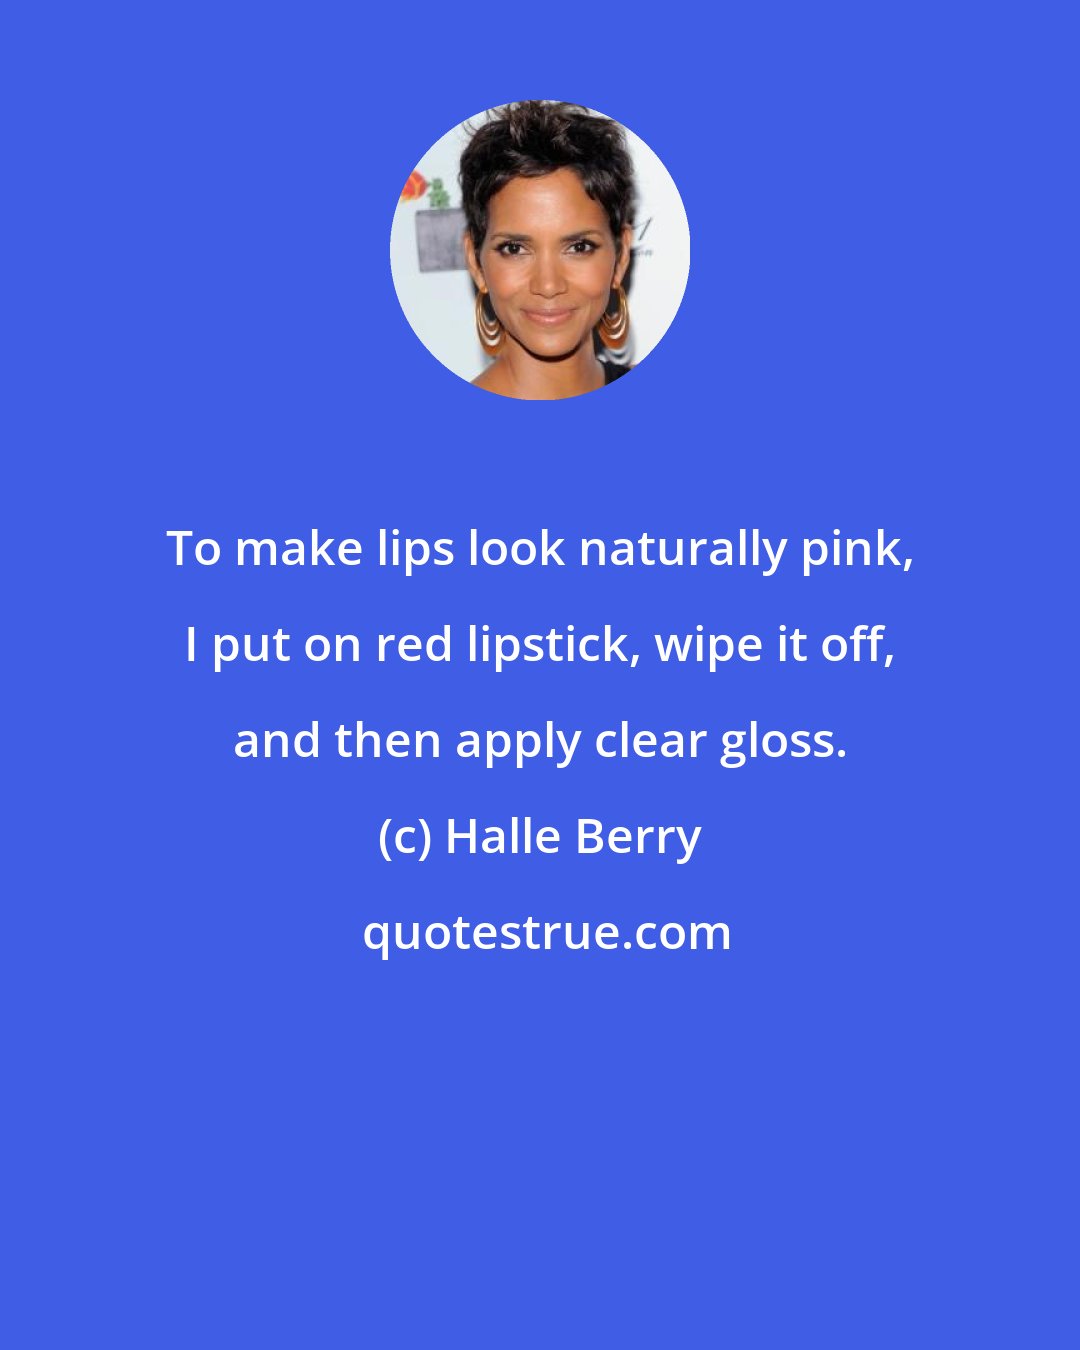 Halle Berry: To make lips look naturally pink, I put on red lipstick, wipe it off, and then apply clear gloss.